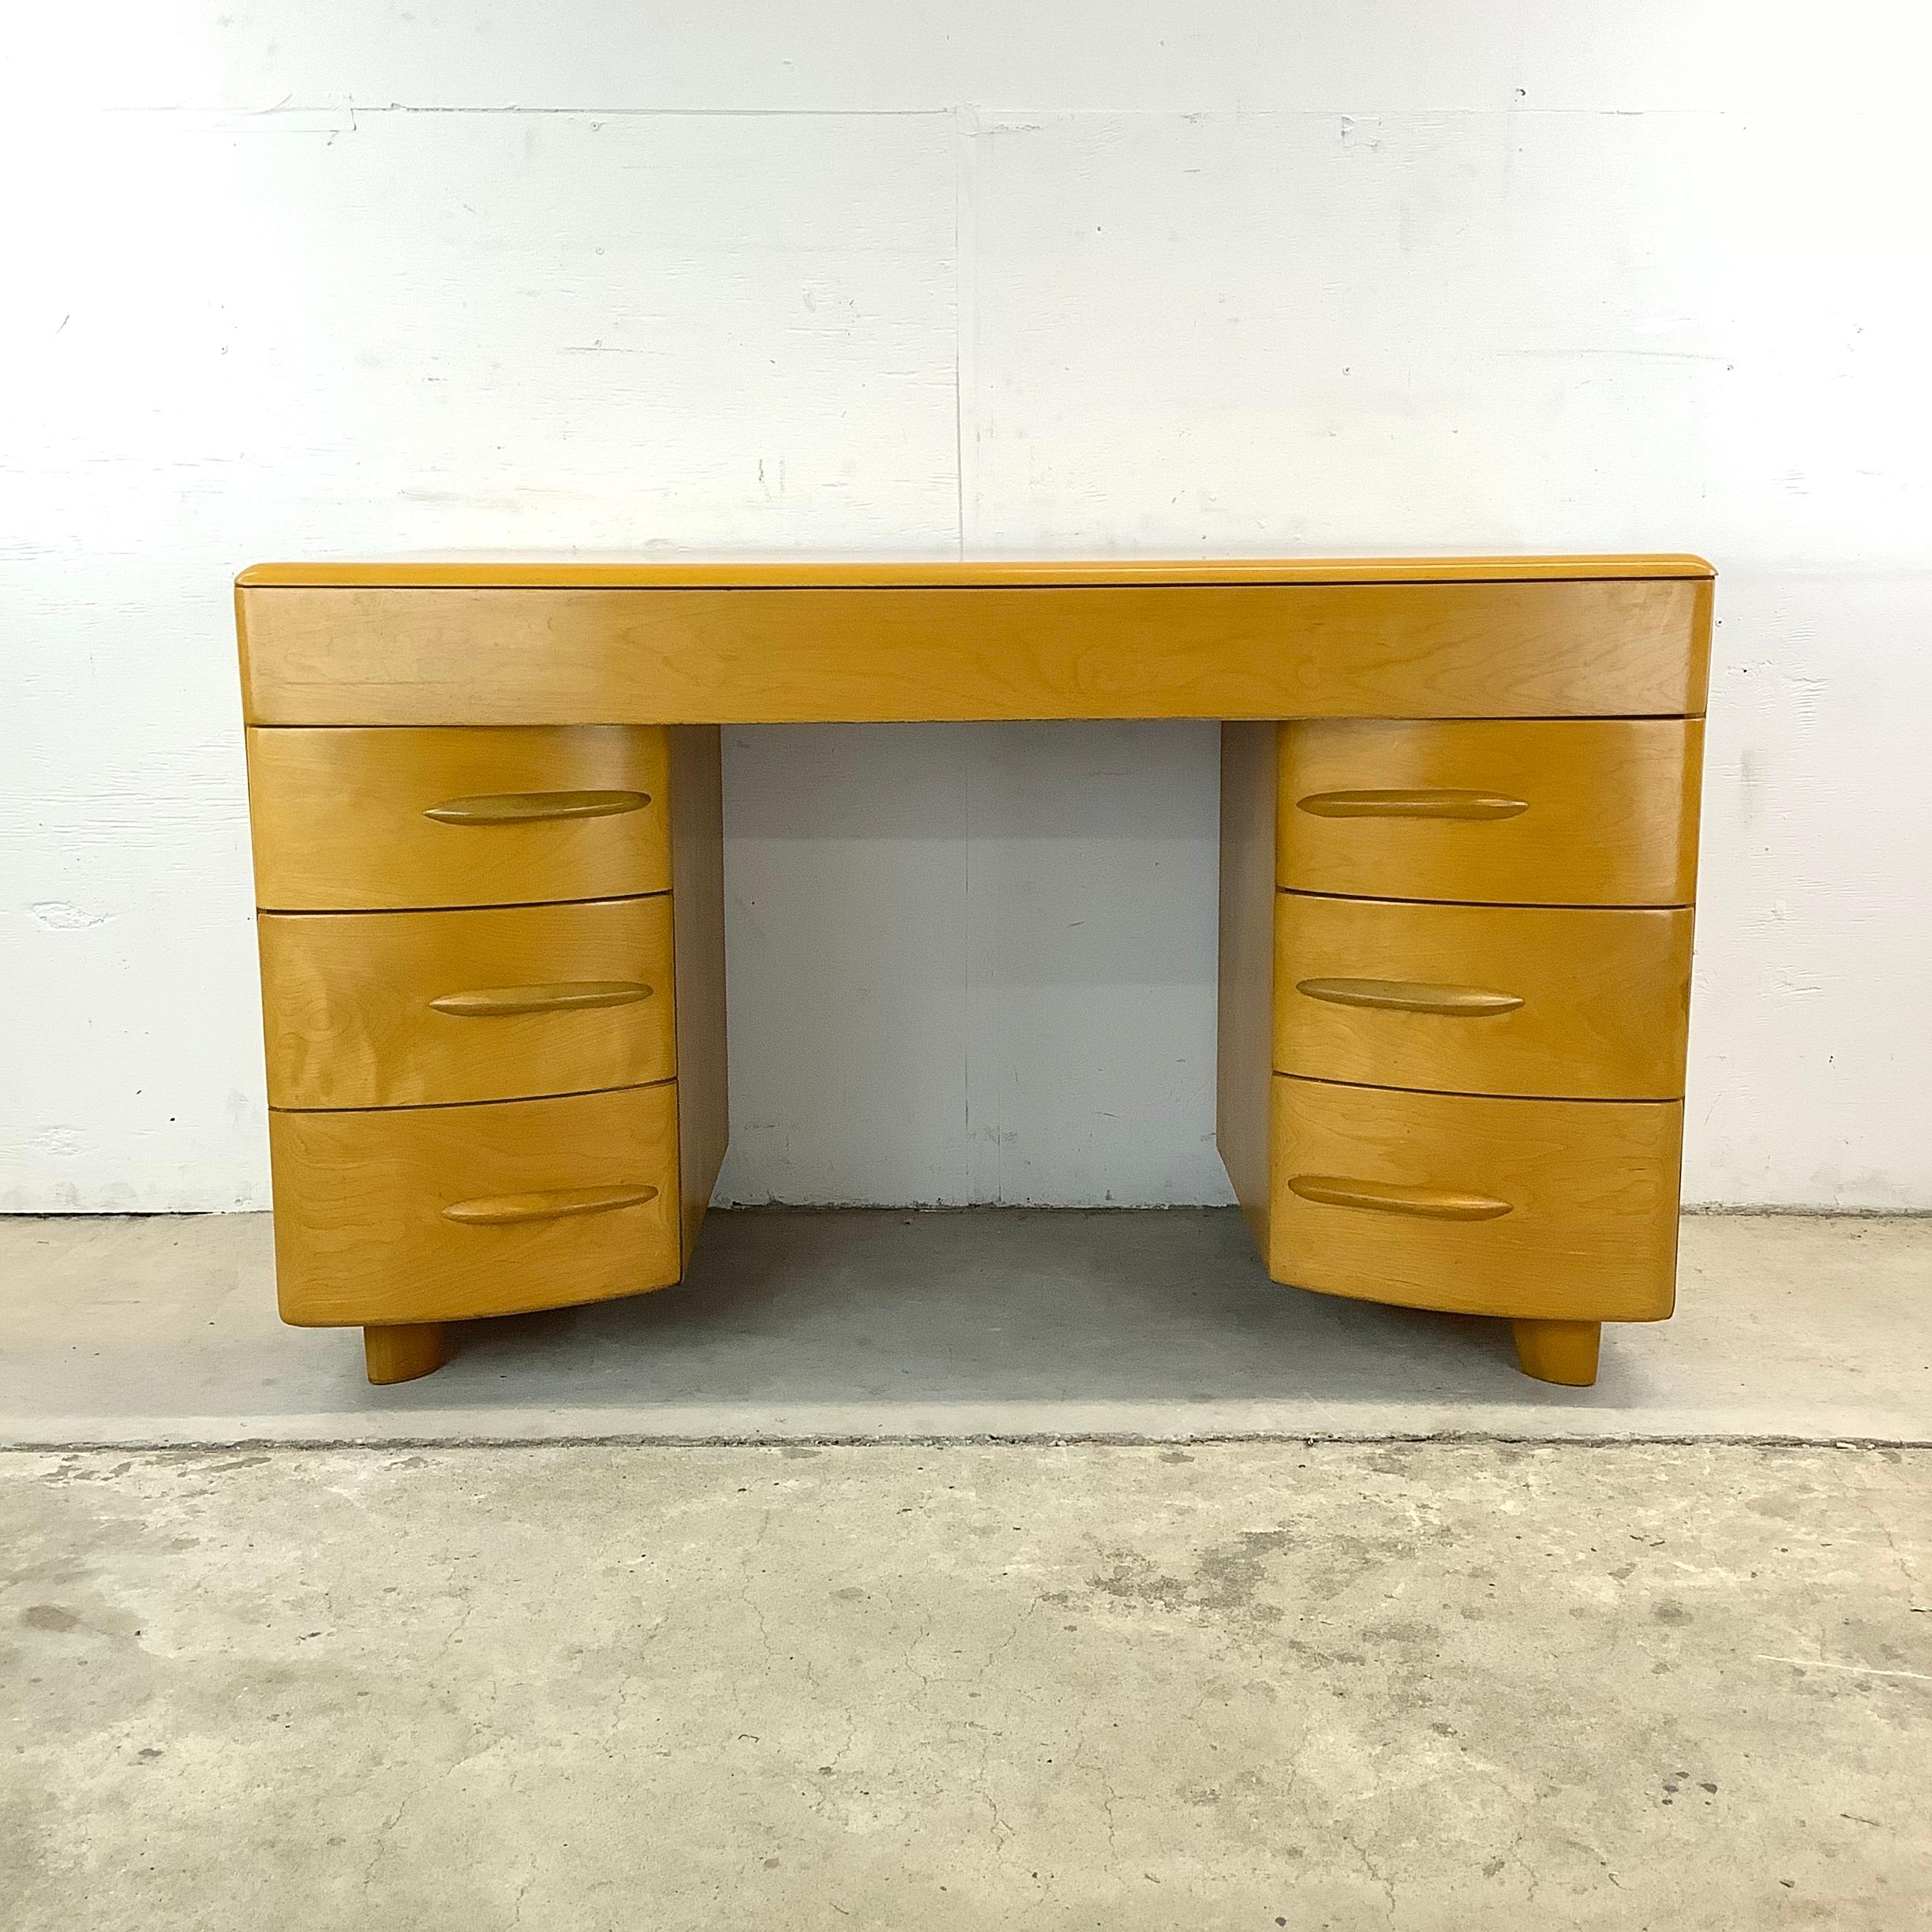 Invite mid-century charm into your workspace with this Heywood Wakefield Desk, a highly sought and highly functional icon of vintage modern furniture. This desk, with its sleek curves and warm honeyed finish, embodies the optimism and innovative